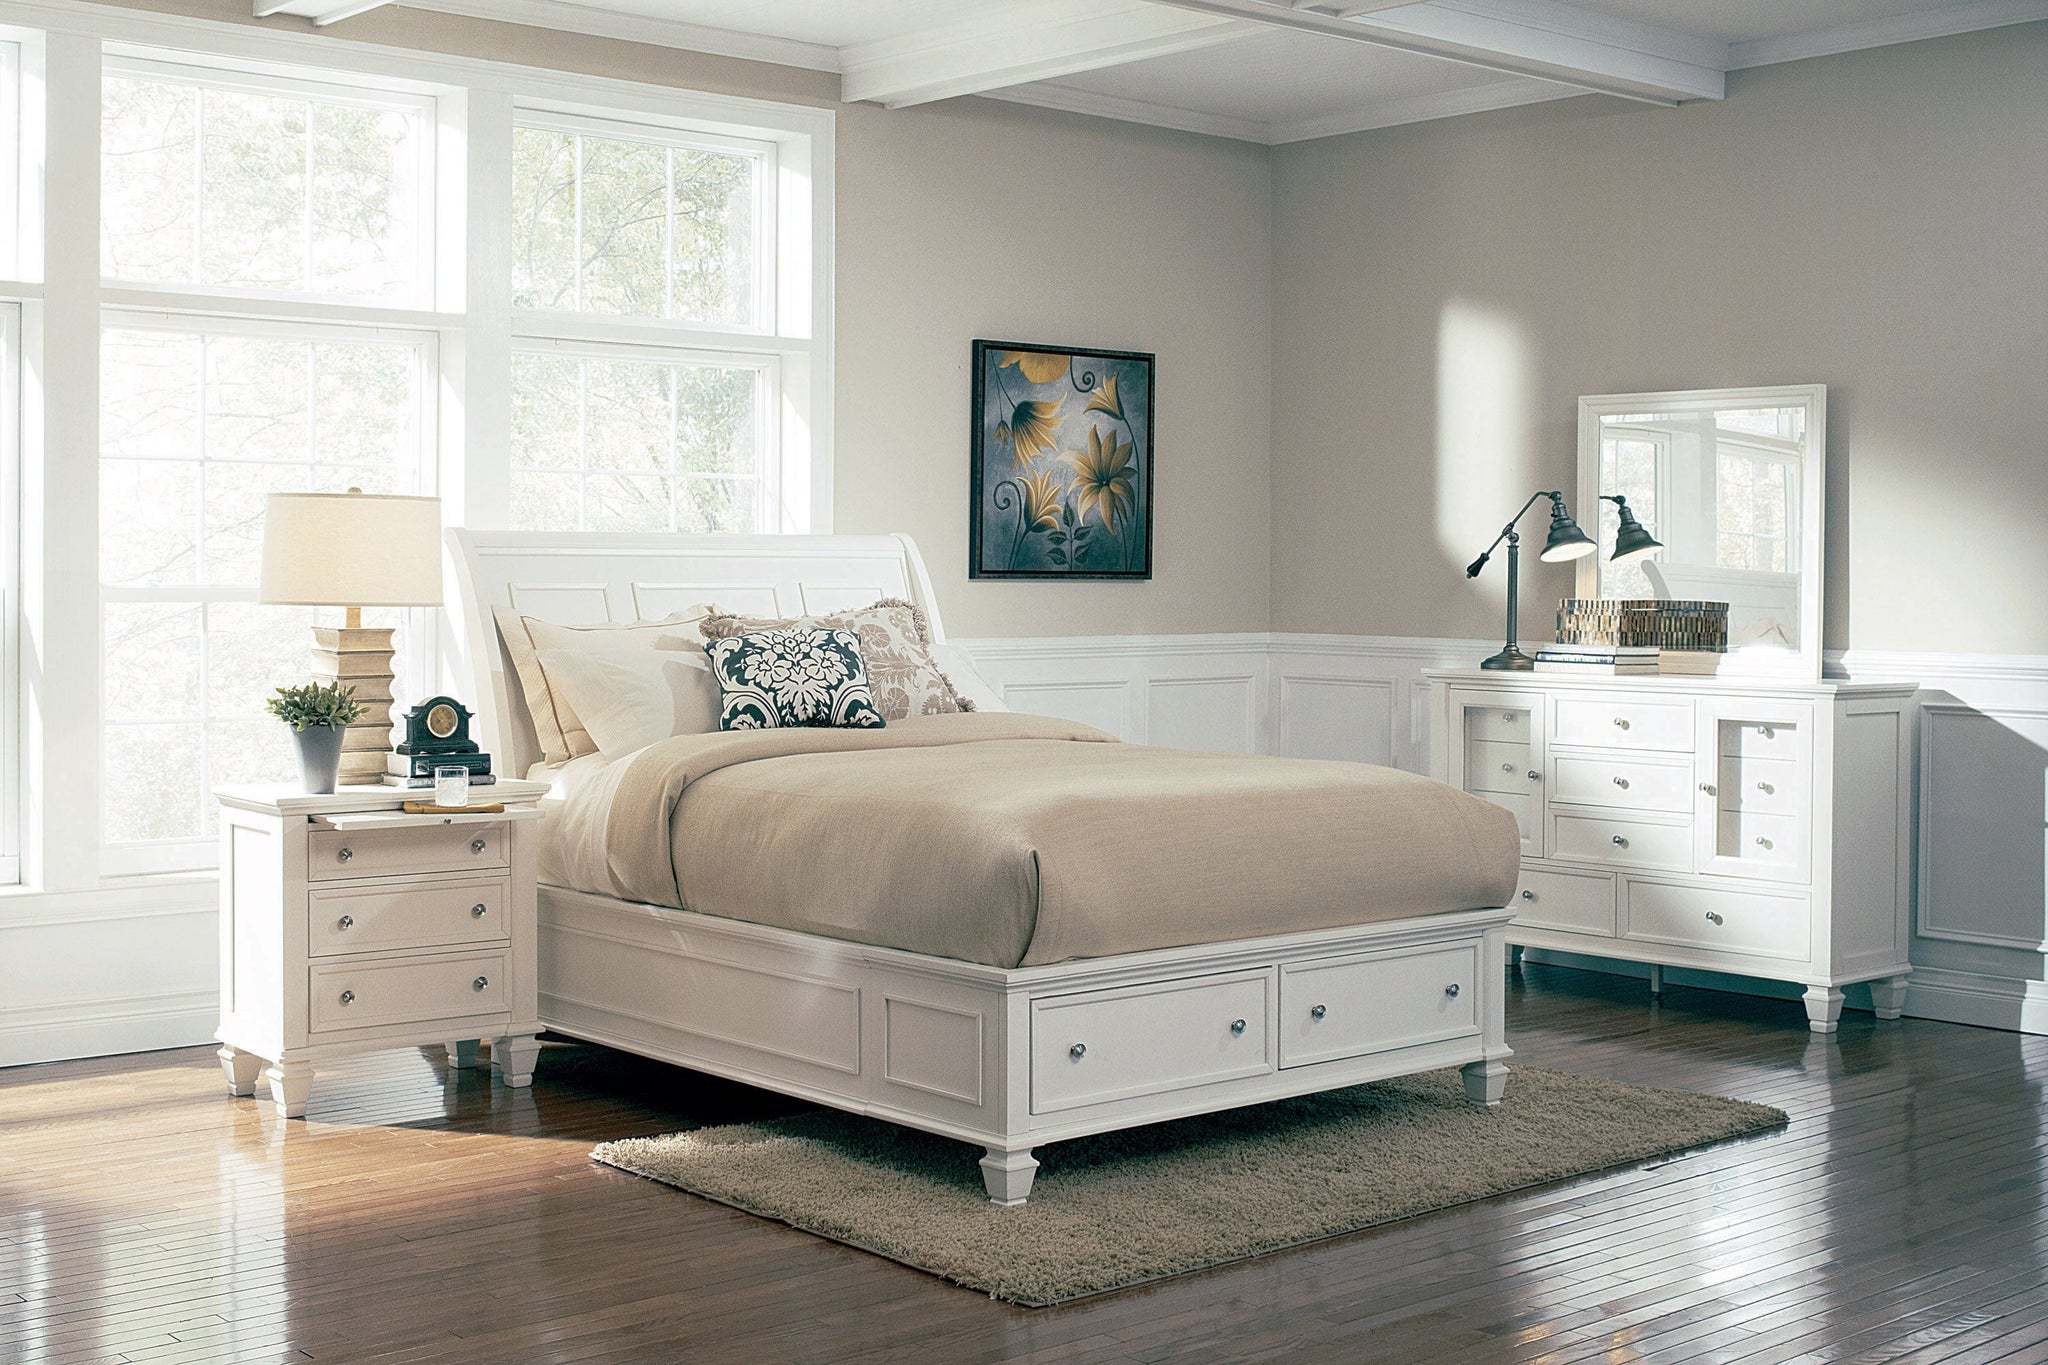 Sandy Beach Queen Storage Sleigh Bed White Collection: Treat Yourself To A Restful Night's Sleep On This Sturdy, Sophisticated Queen Bed. It's Durable And Glamorous. This Bed Exudes Graceful Elegance. SKU: 201309Q